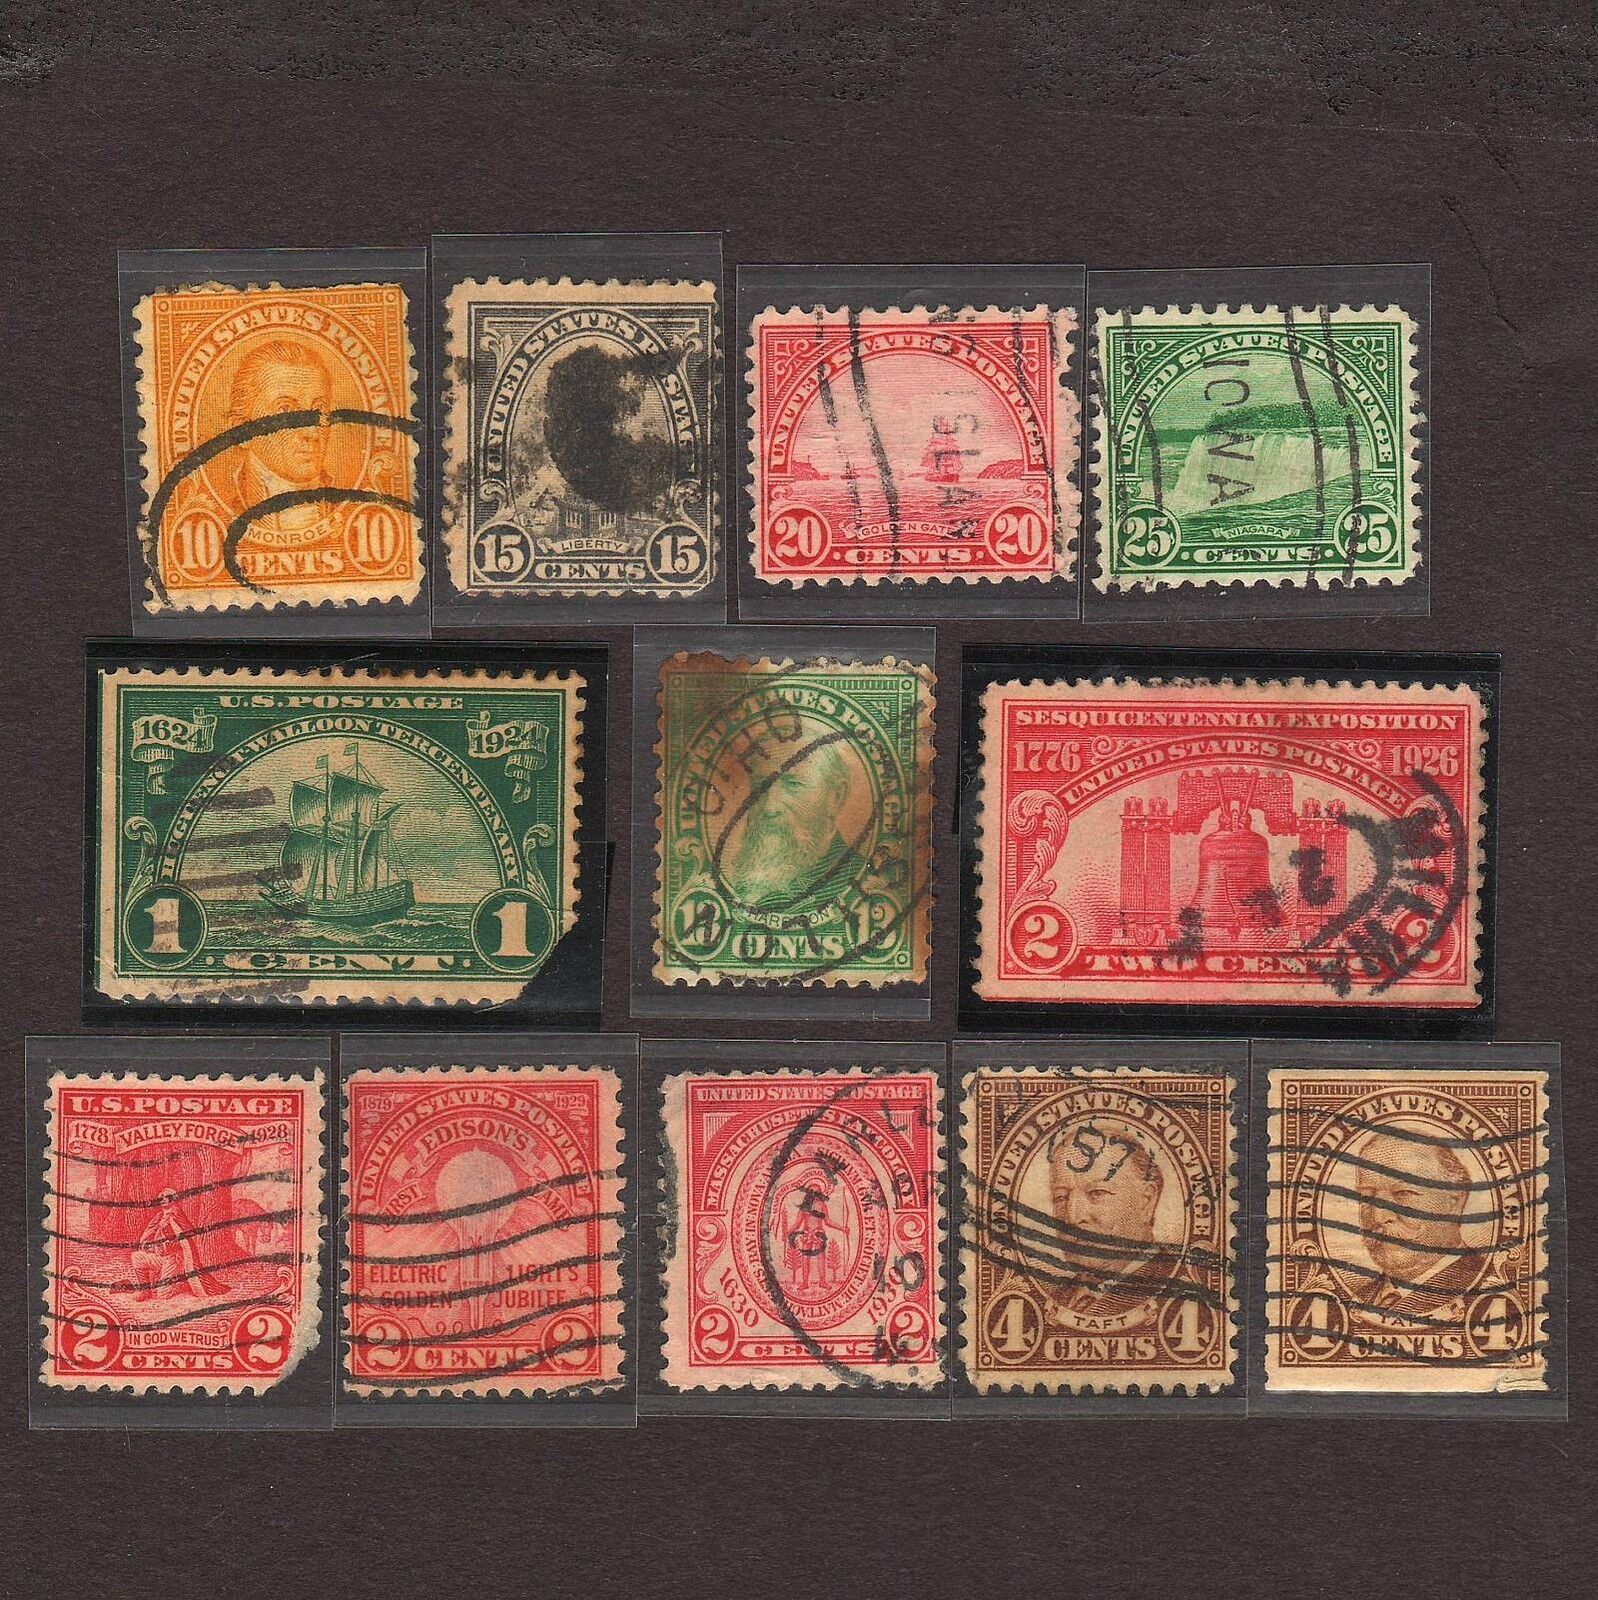 Scott #562 566-7-8 614 622 627 645 654 682-5-7 USA 12 used postage stamps 03S